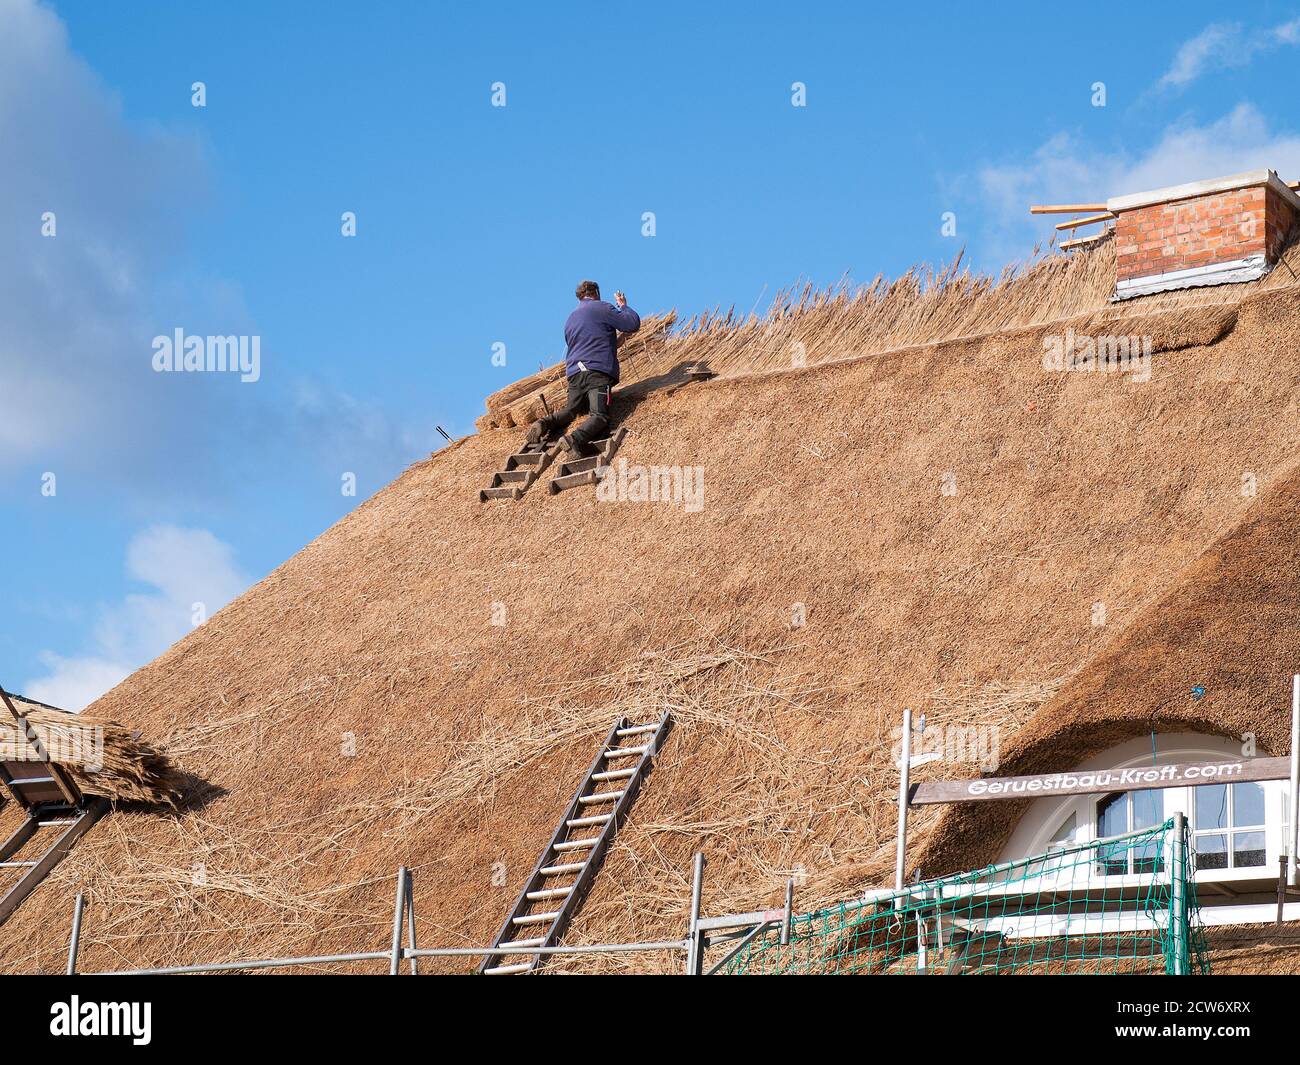 Thatchers at work restoring the thatched roof of an old farmhousein Bütlingen, Niedersachsen, Germany. Stock Photo